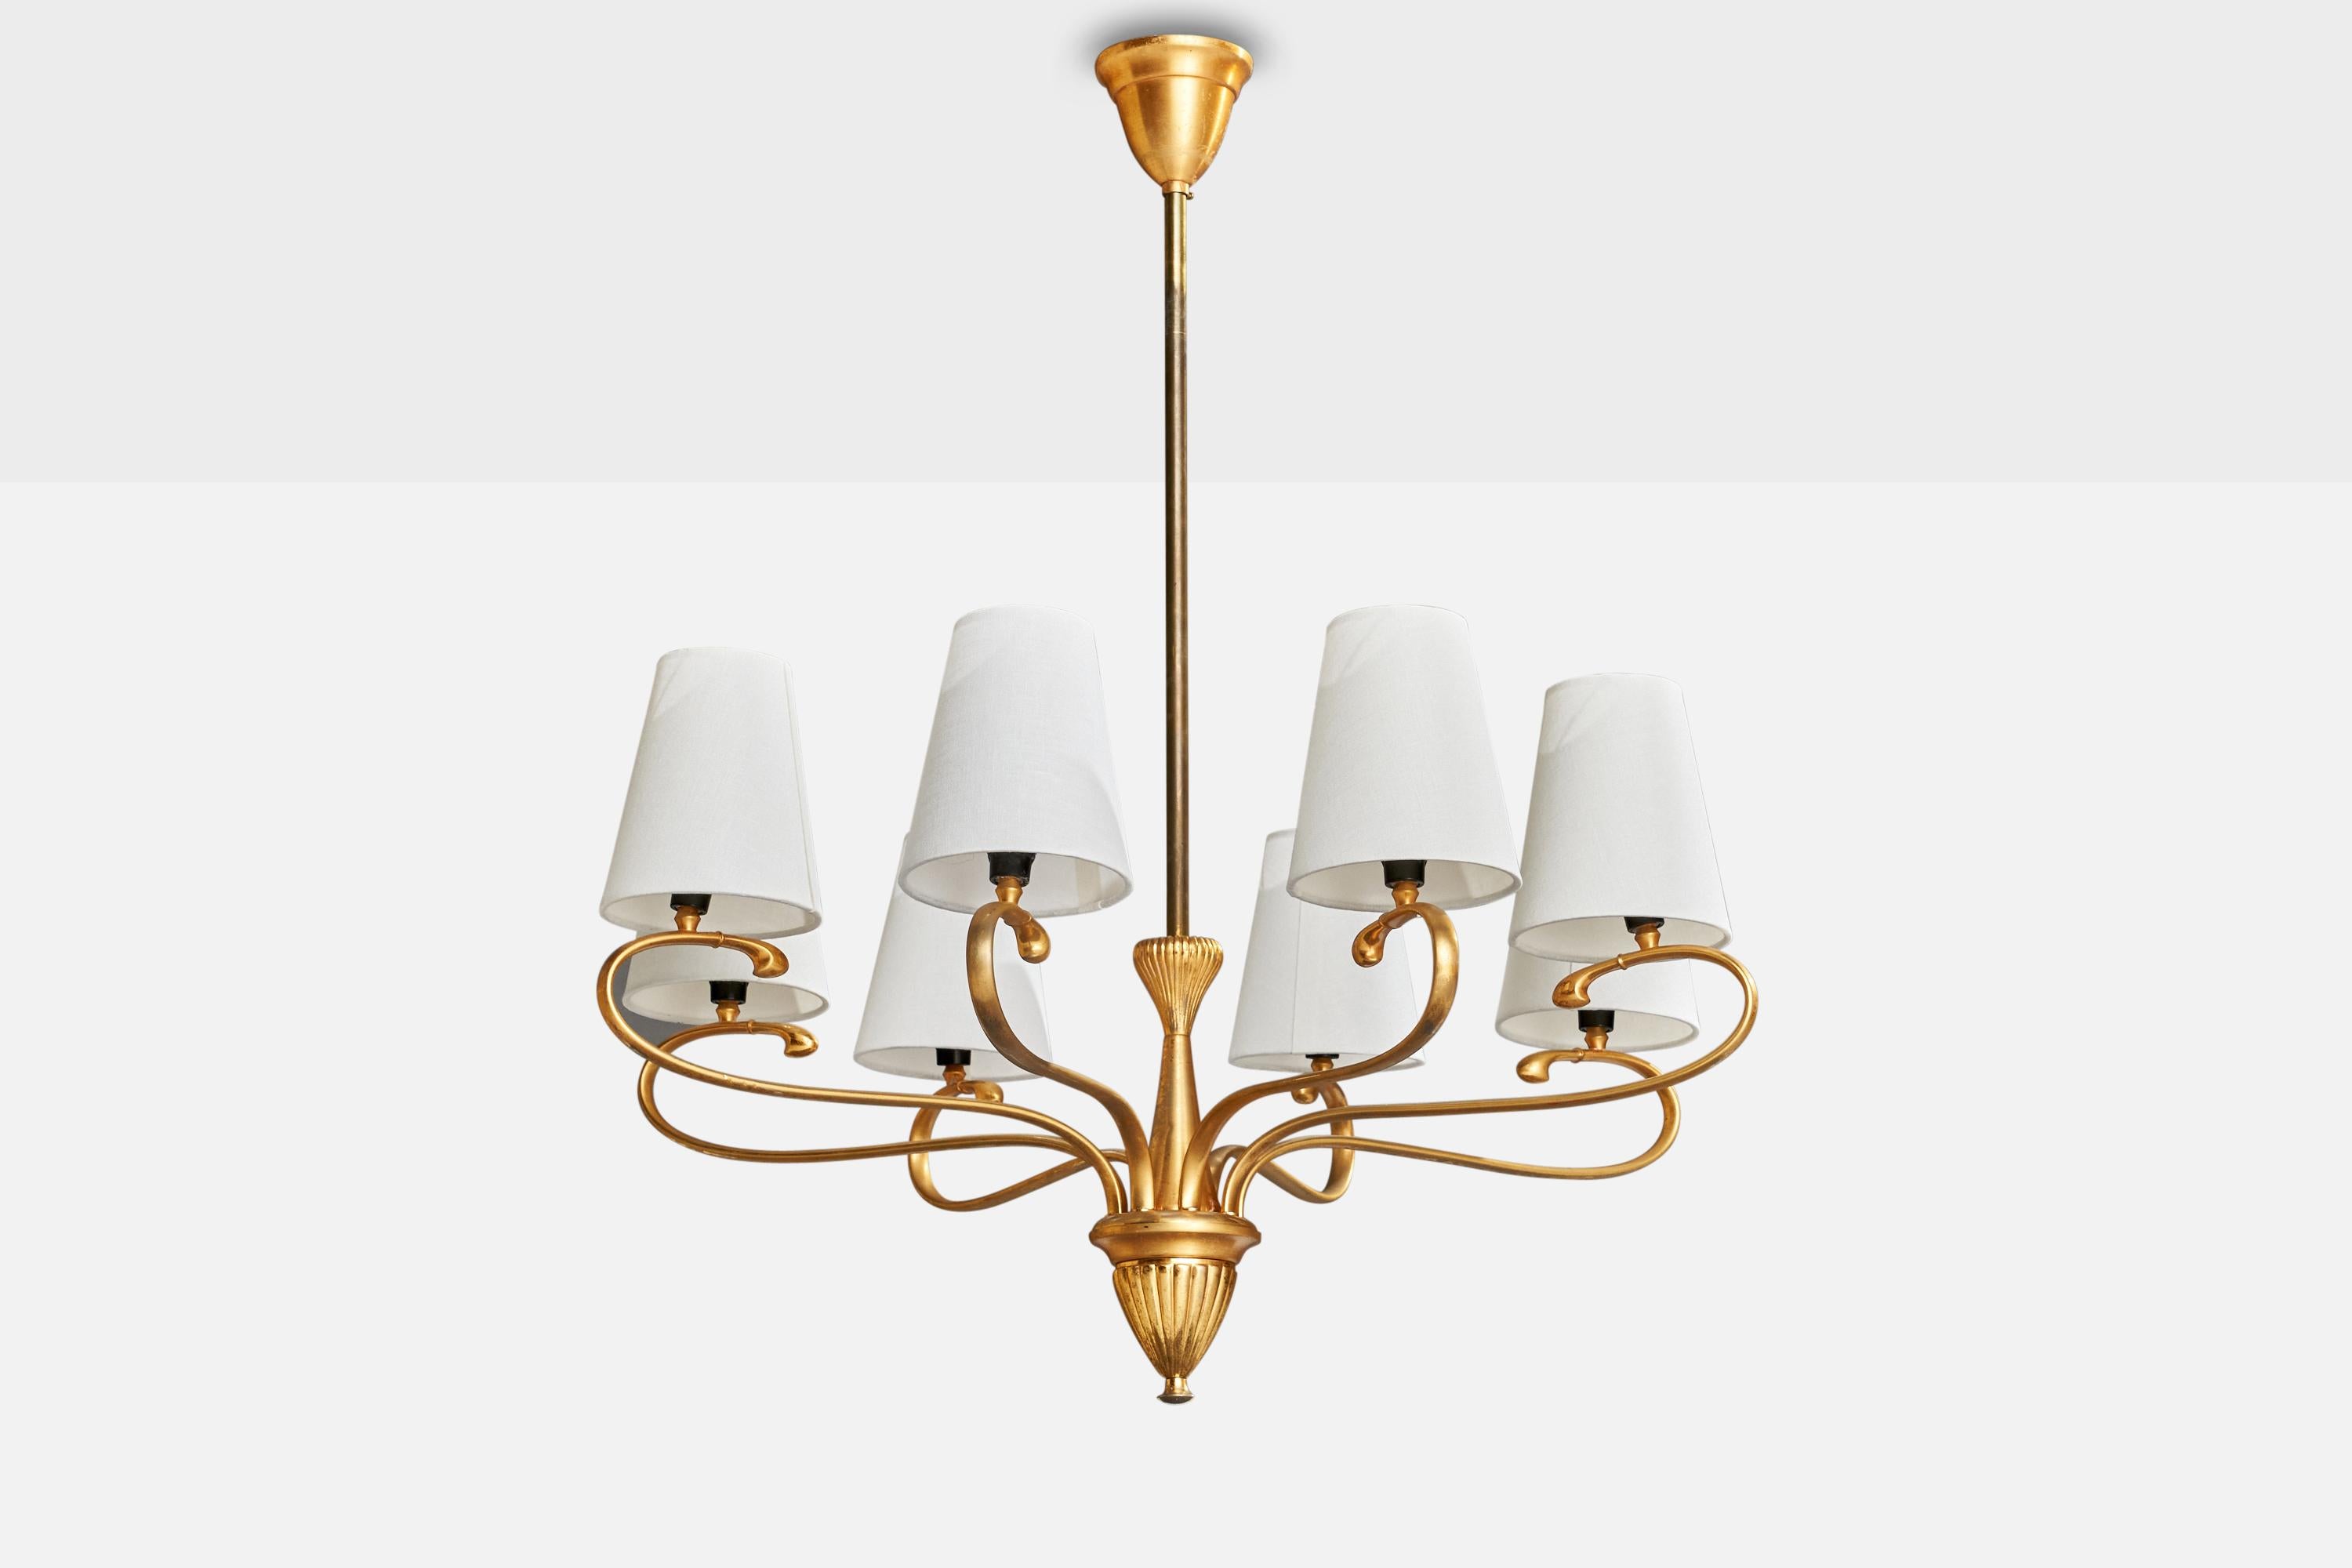 A gilt brass and white fabric chandelier designed and produced in Austria, c. 1950s.

Dimensions of canopy (inches): 3.75” H x 3.5” Diameter
Socket takes standard E-12 bulbs. 8 sockets.There is no maximum wattage stated on the fixture. All lighting